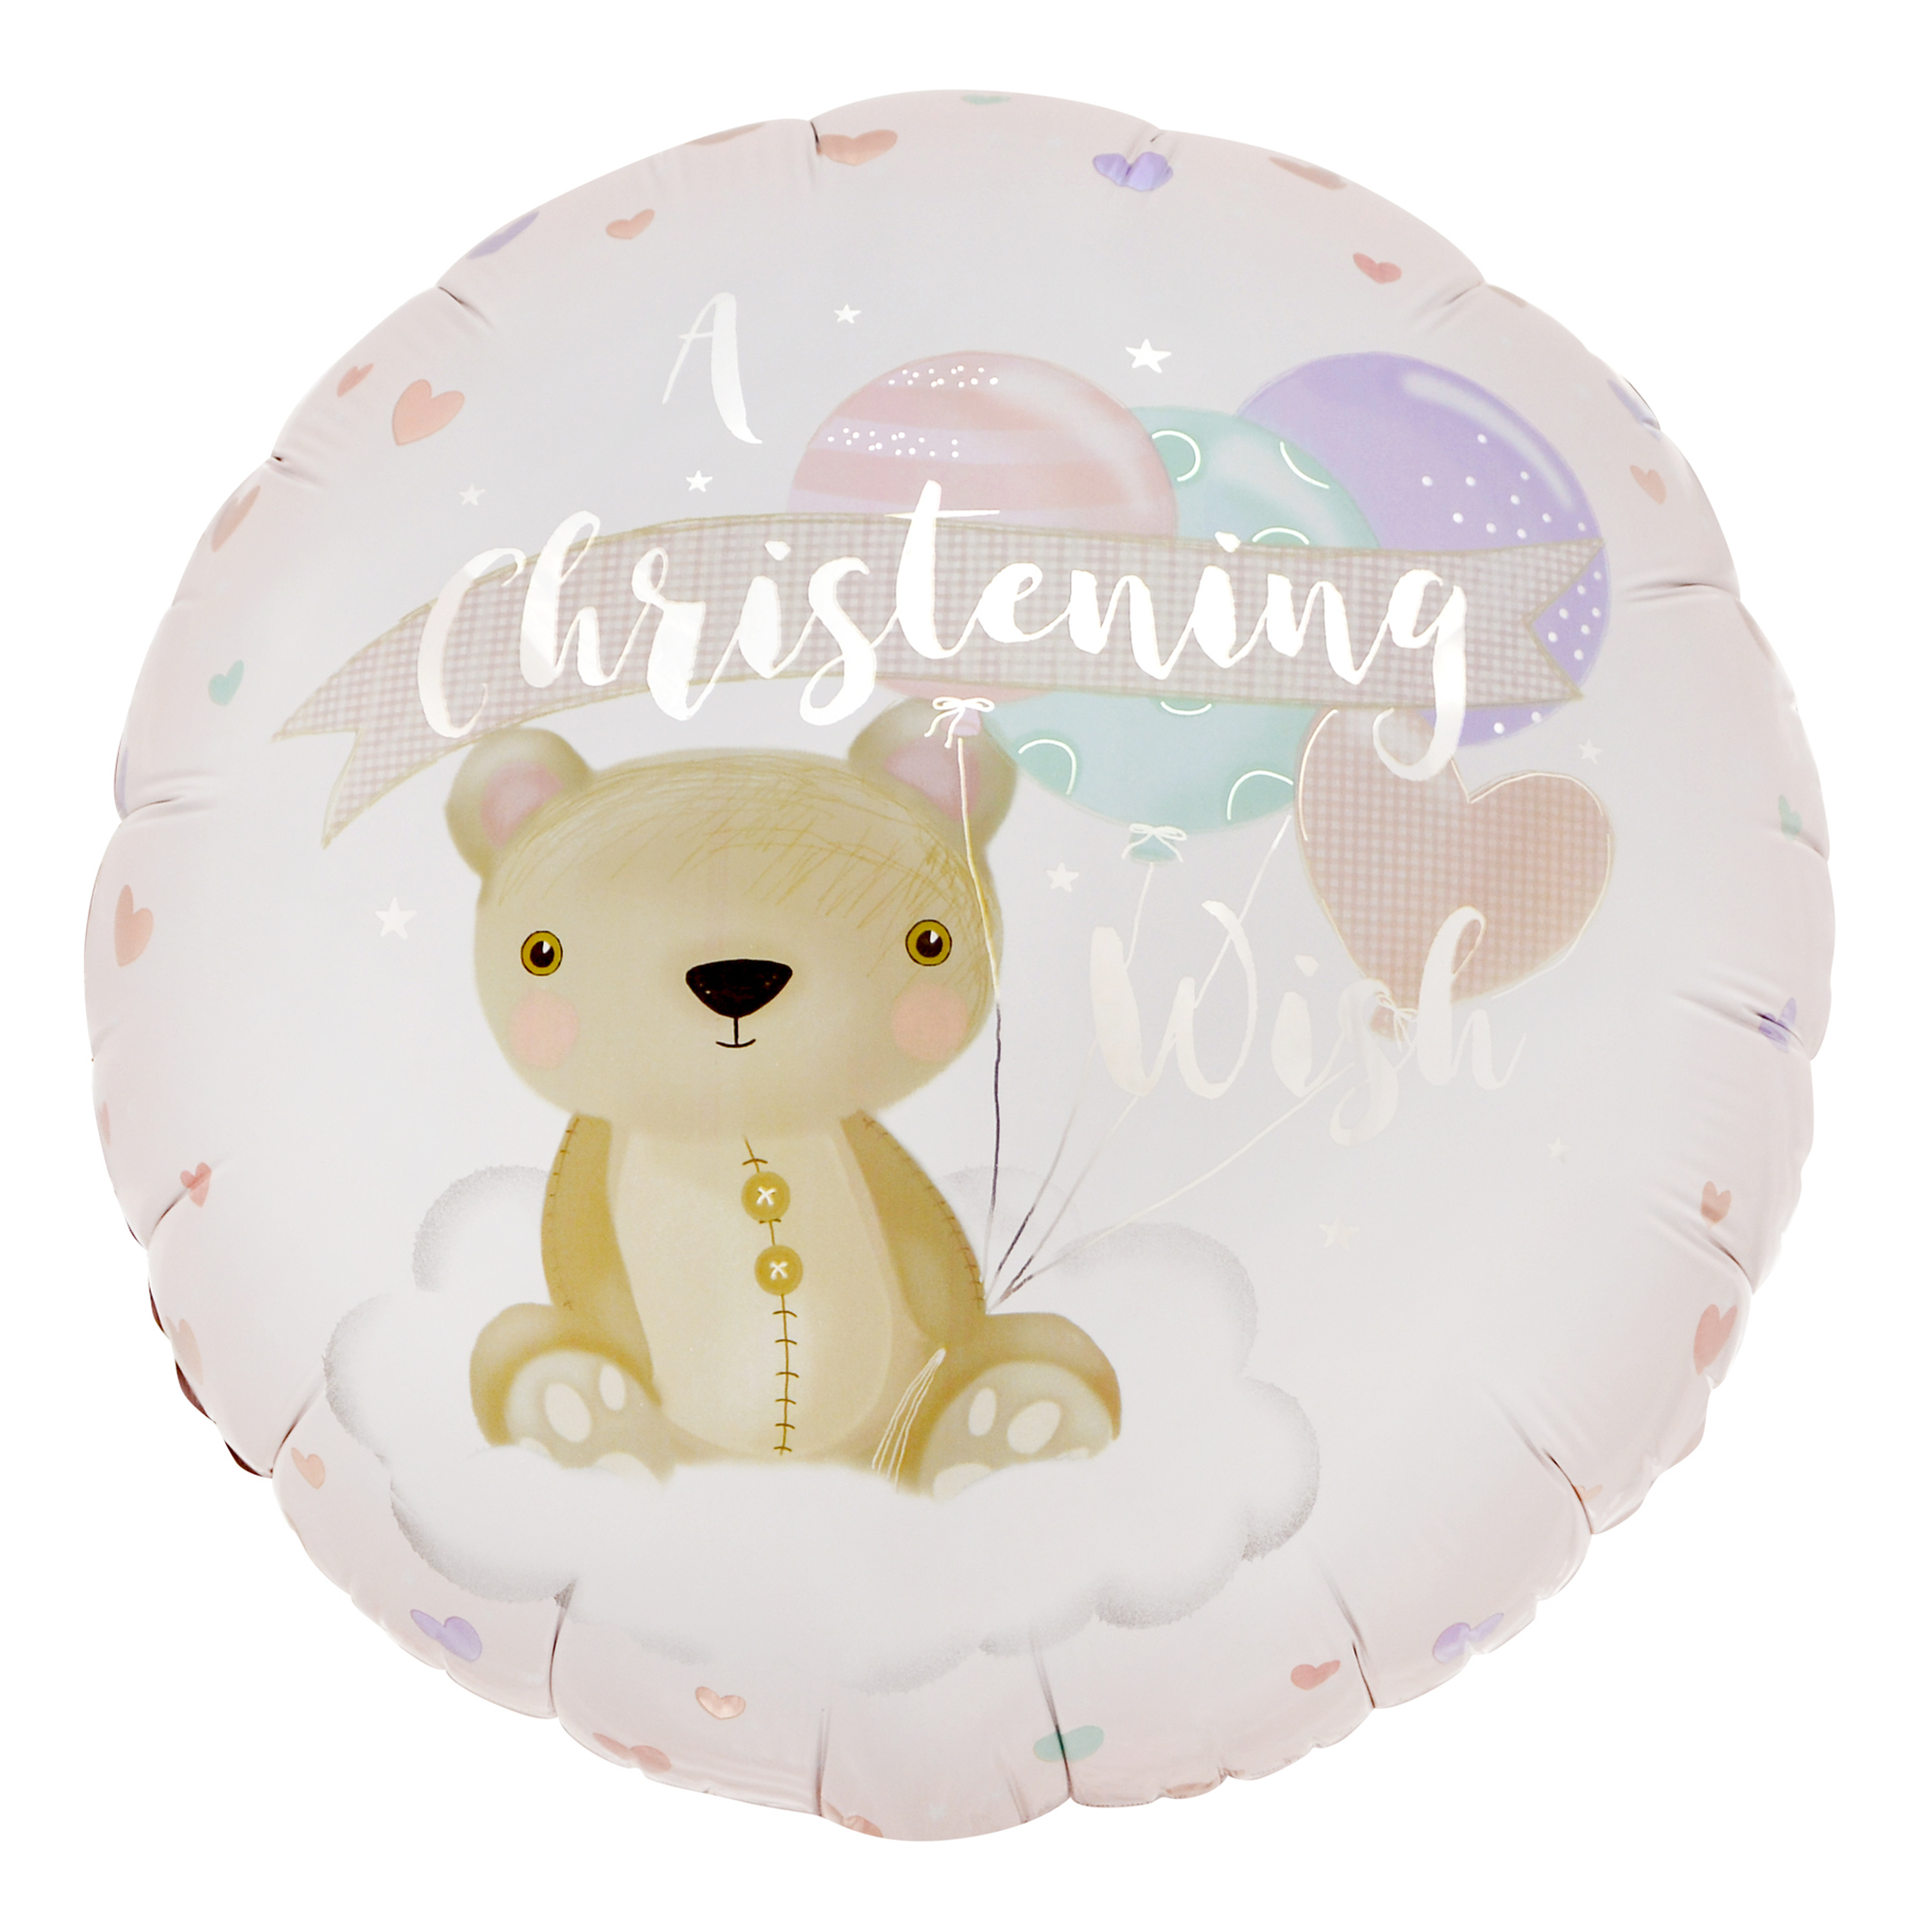 A Christening Wish 18-Inch Foil Helium Balloon